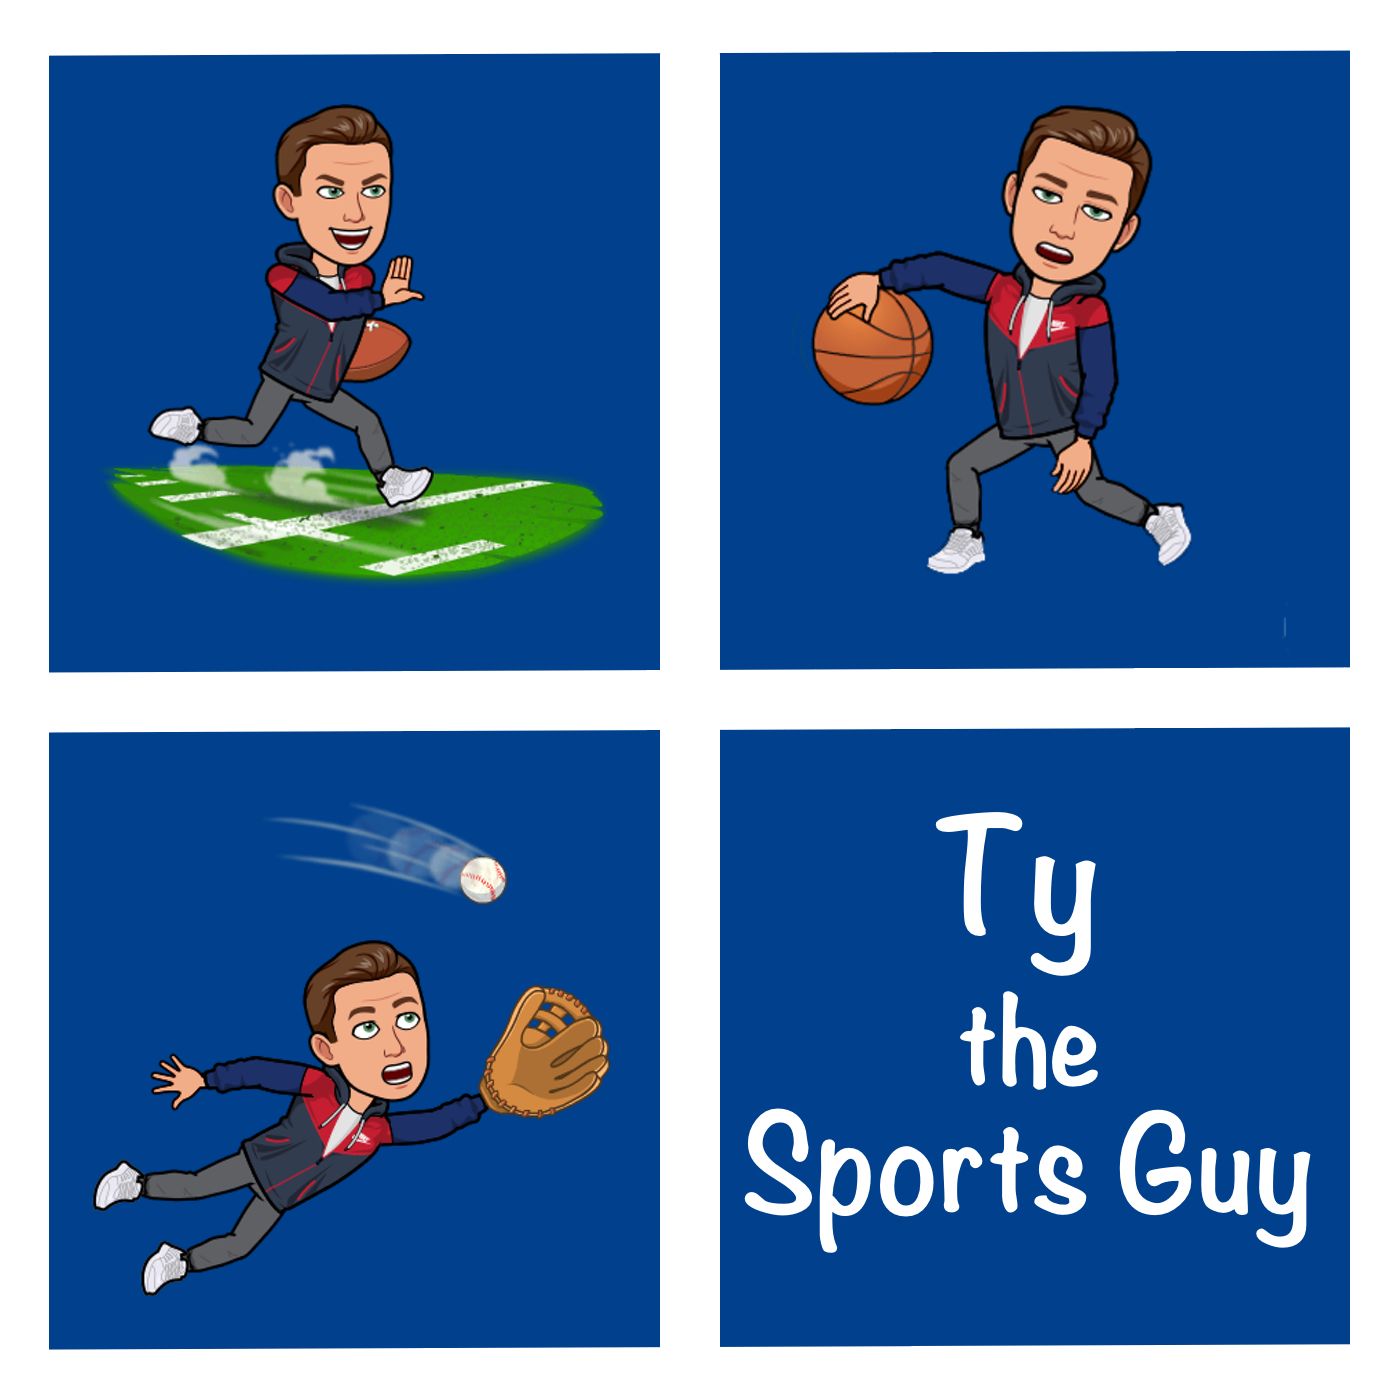 Ty the Sports Guy